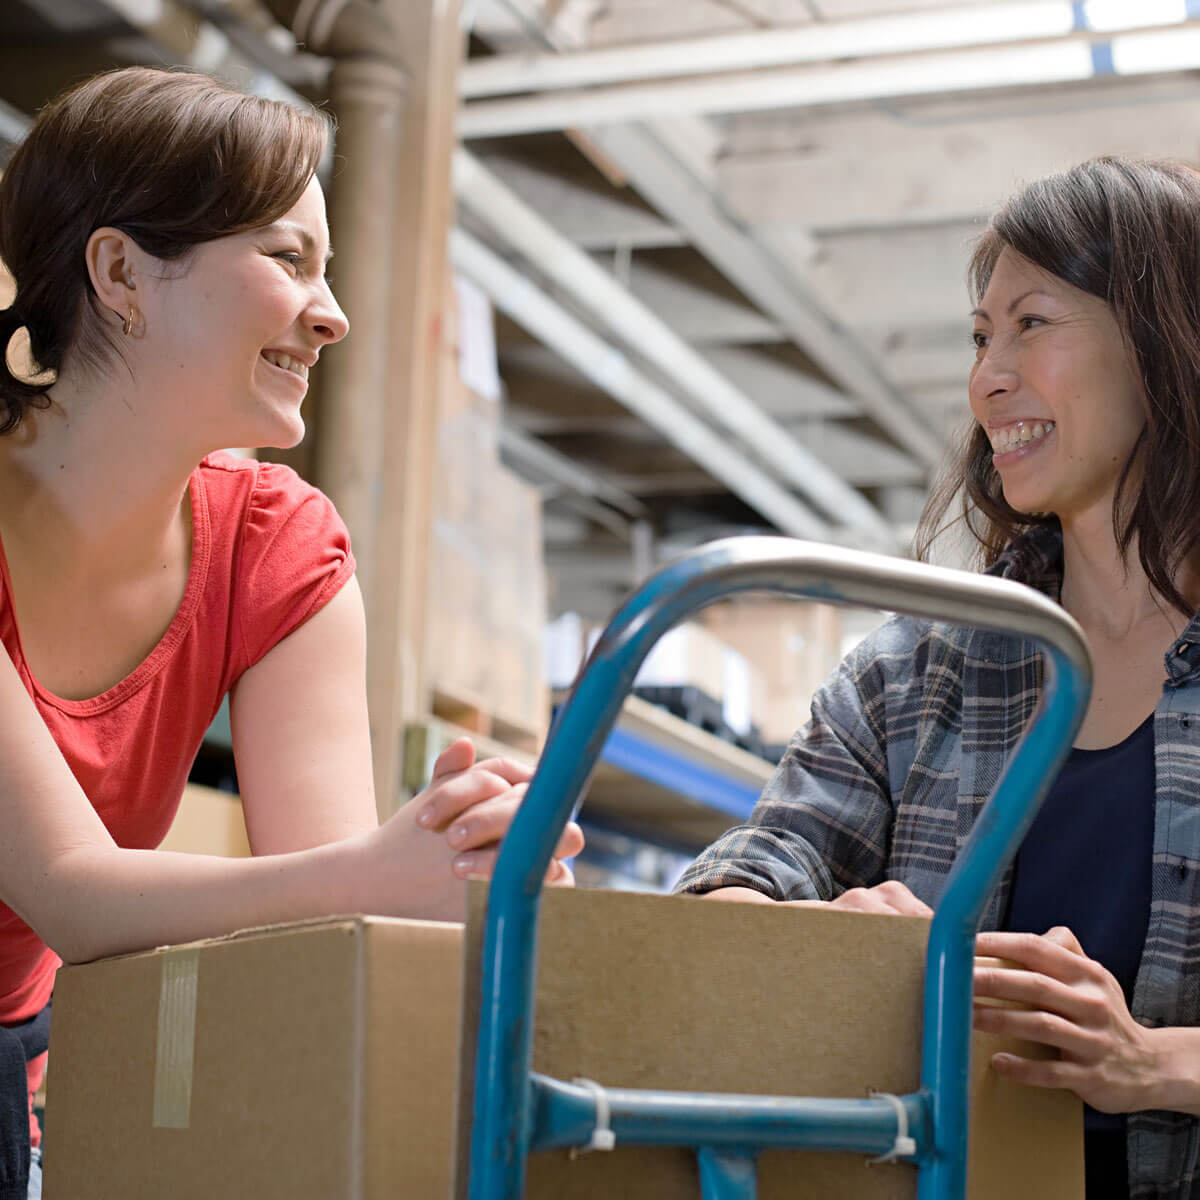 Two Humana suppliers in a warehouse smile as they talk and collect packages for an order.